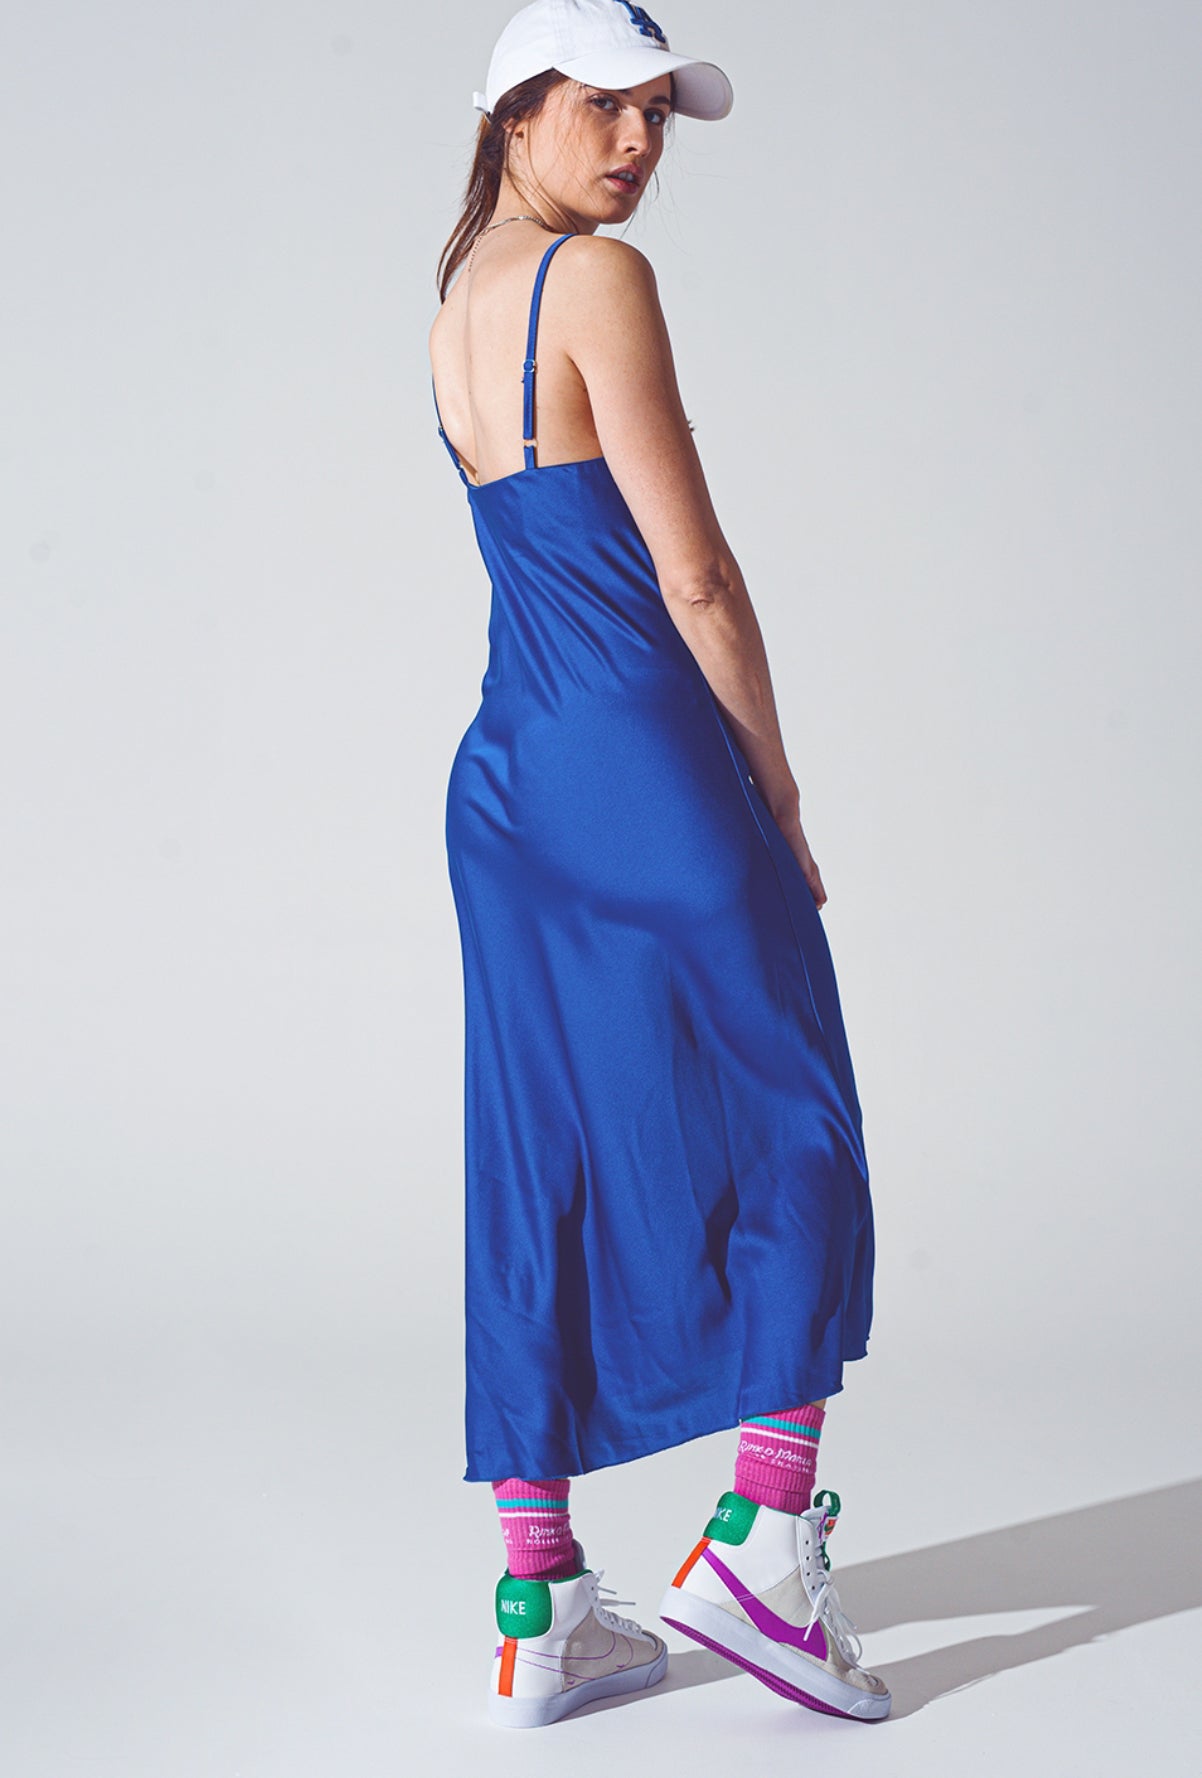 Electric Blue Slip Dress - Premium variation from Tooksie - Just $39.99! Shop now at Tooksie